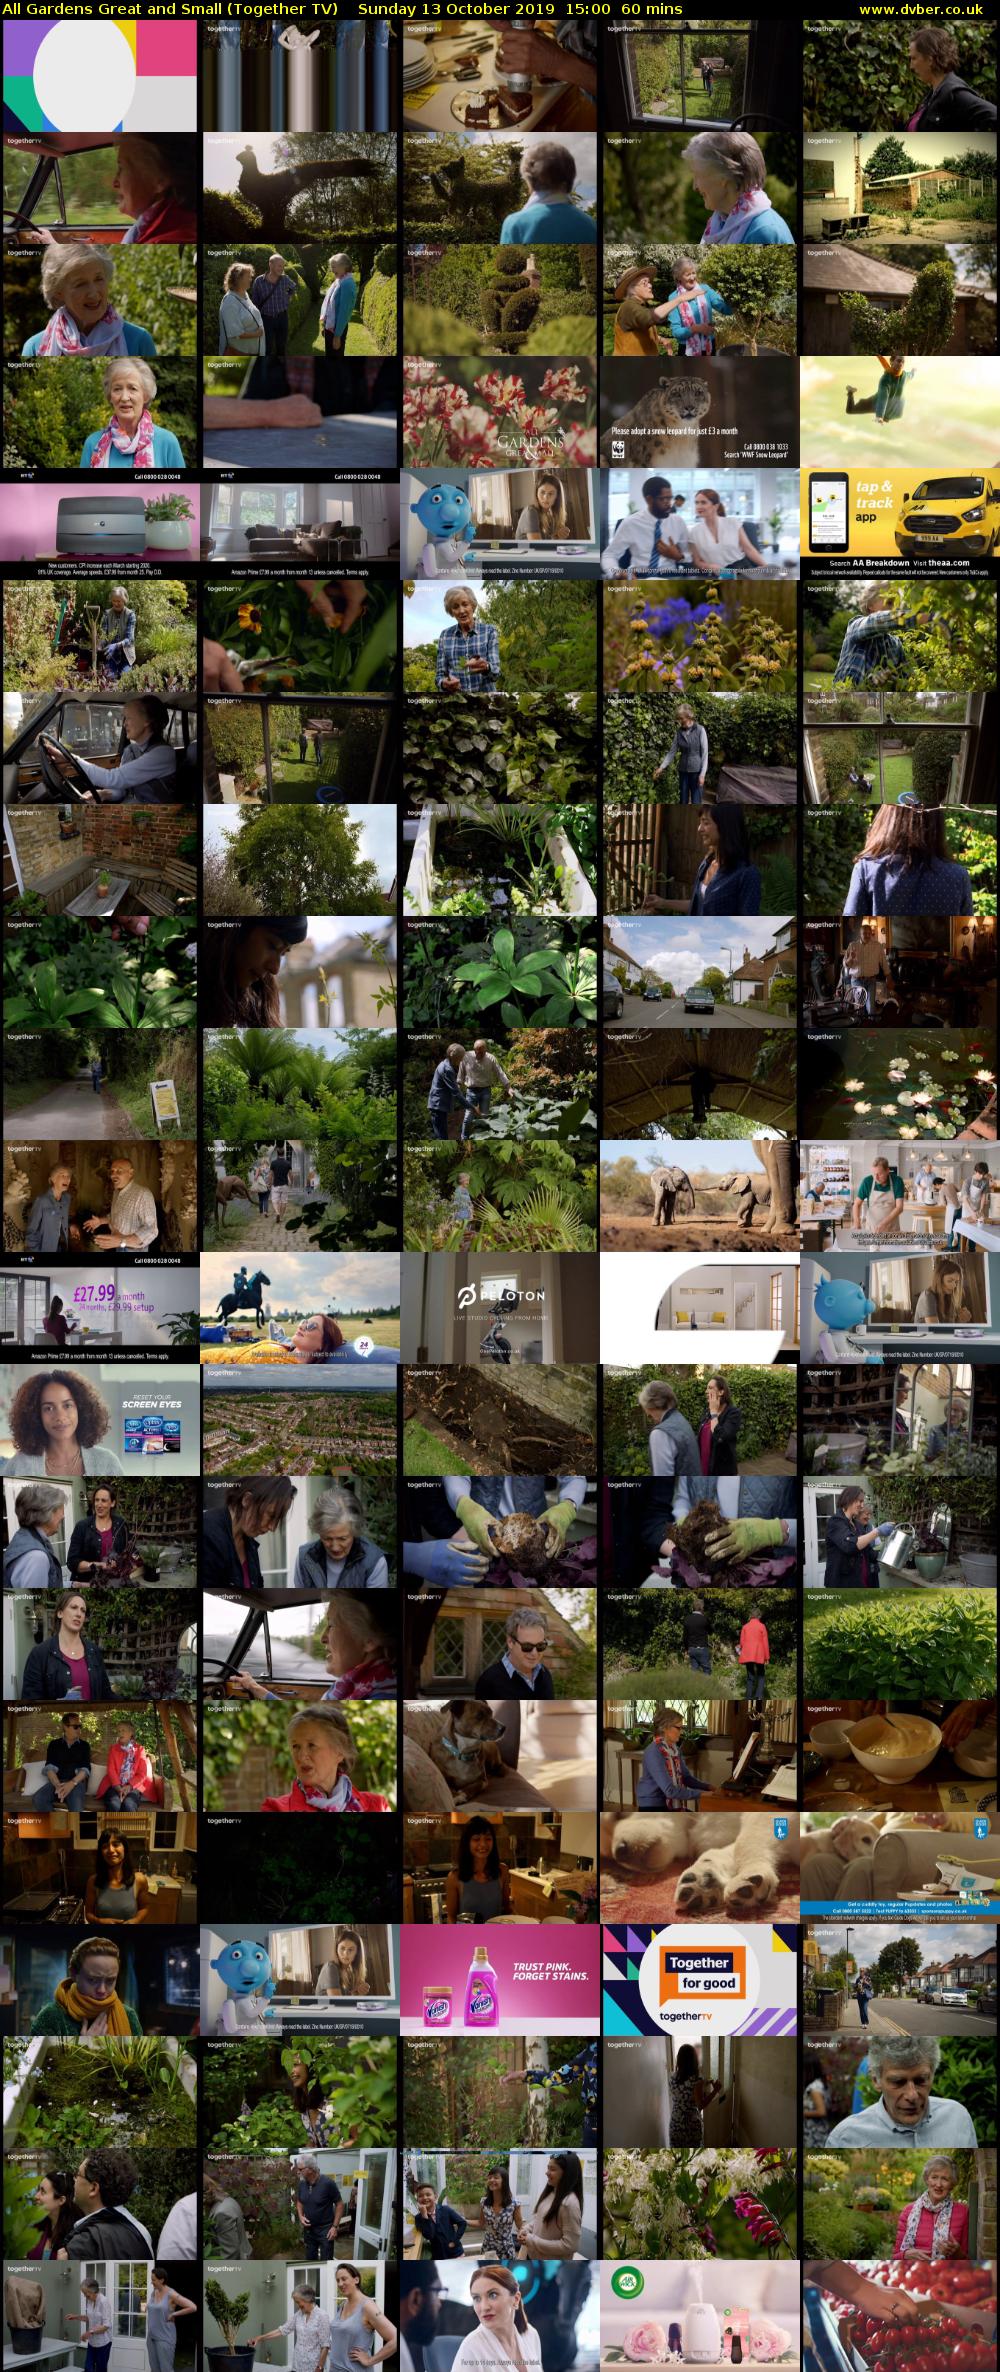 All Gardens Great and Small (Together TV) Sunday 13 October 2019 15:00 - 16:00